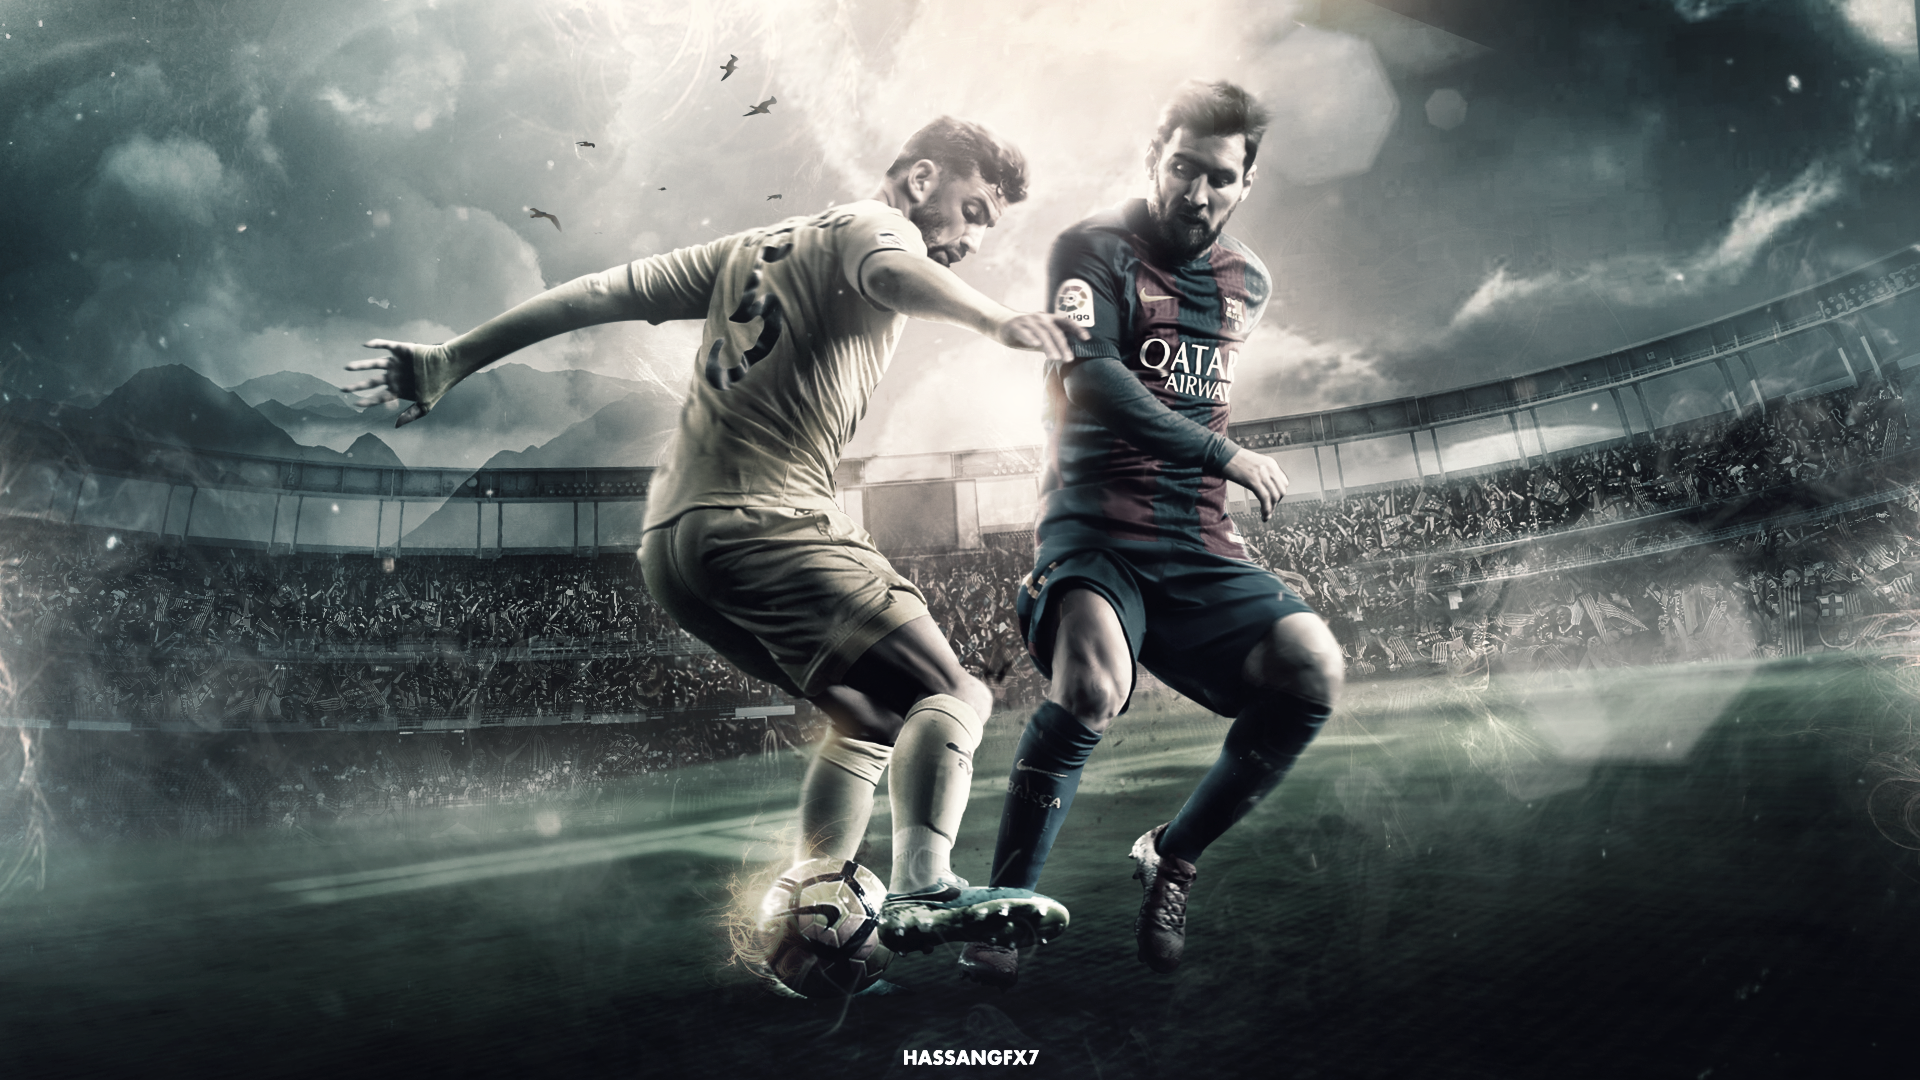 Lionel Messi Wallpaper By Hassangfx7